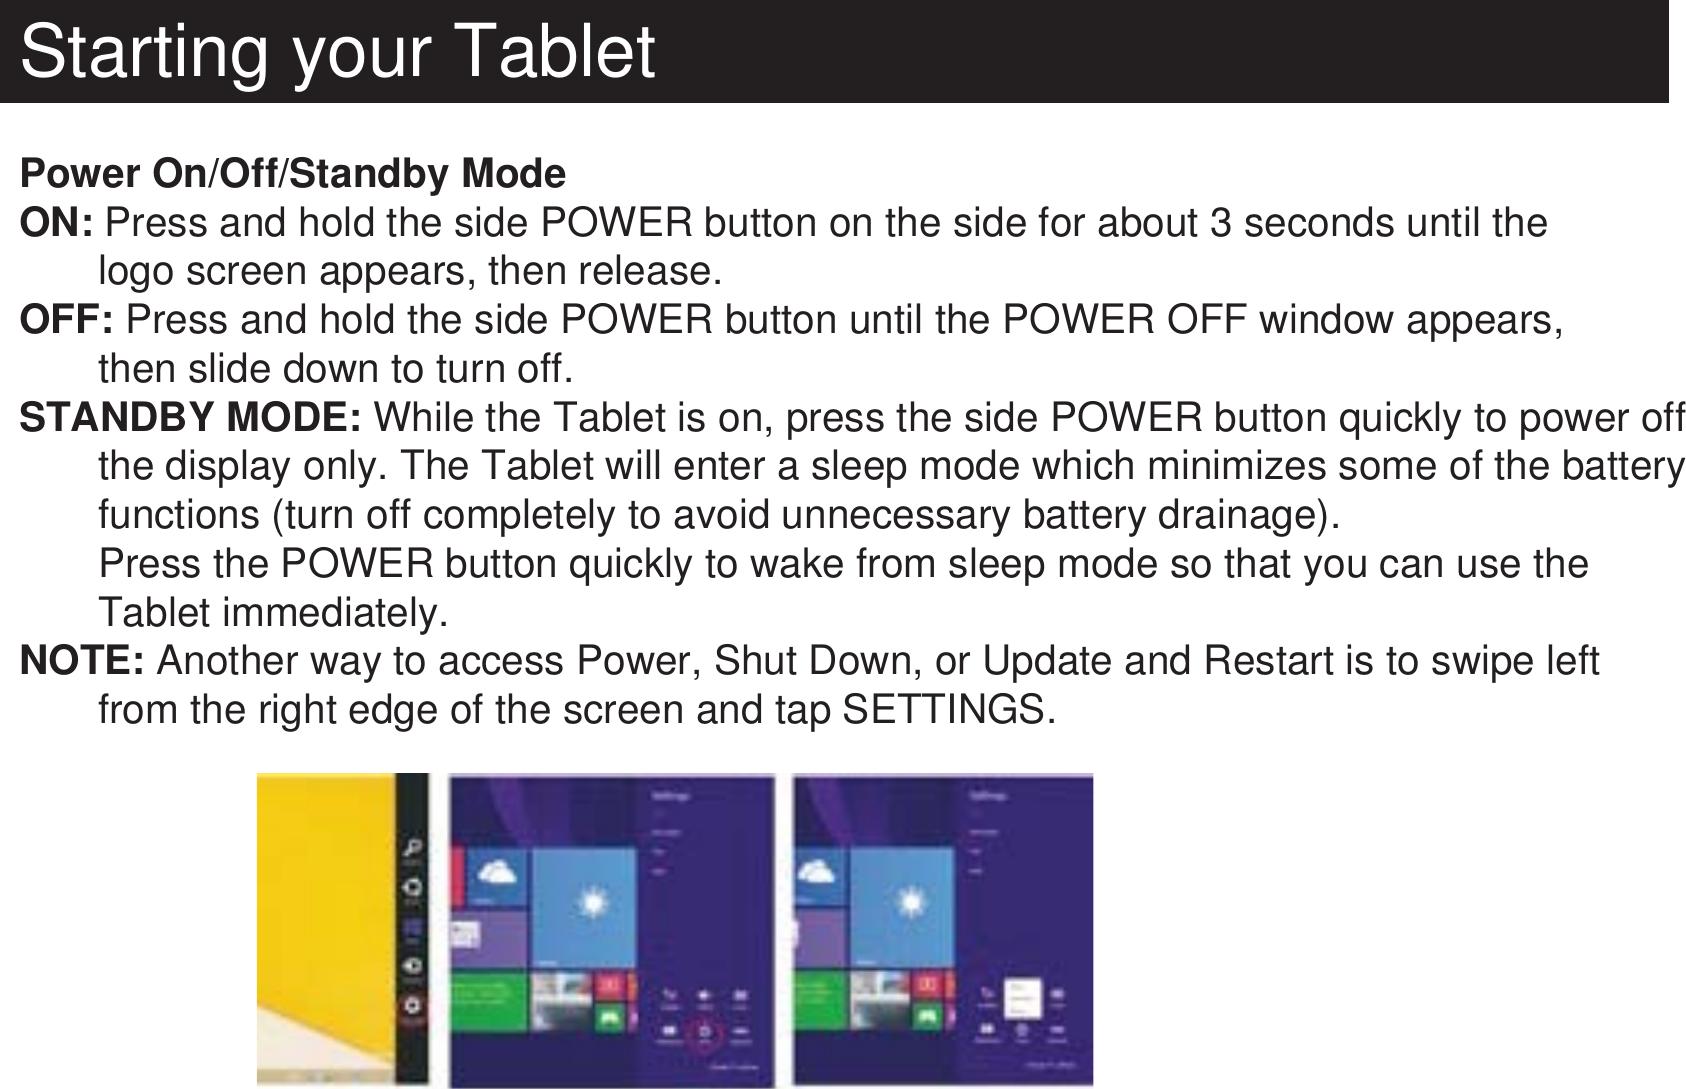 Starting your TabletPower On/Off/Standby ModeON: Press and hold the side POWER button on the side for about 3 seconds until the        logo screen appears, then release.OFF: Press and hold the side POWER button until the POWER OFF window appears,        then slide down to turn off.STANDBY MODE: While the Tablet is on, press the side POWER button quickly to power off        the display only. The Tablet will enter a sleep mode which minimizes some of the battery       functions (turn off completely to avoid unnecessary battery drainage).       Press the POWER button quickly to wake from sleep mode so that you can use the        Tablet immediately.NOTE: Another way to access Power, Shut Down, or Update and Restart is to swipe left        from the right edge of the screen and tap SETTINGS.